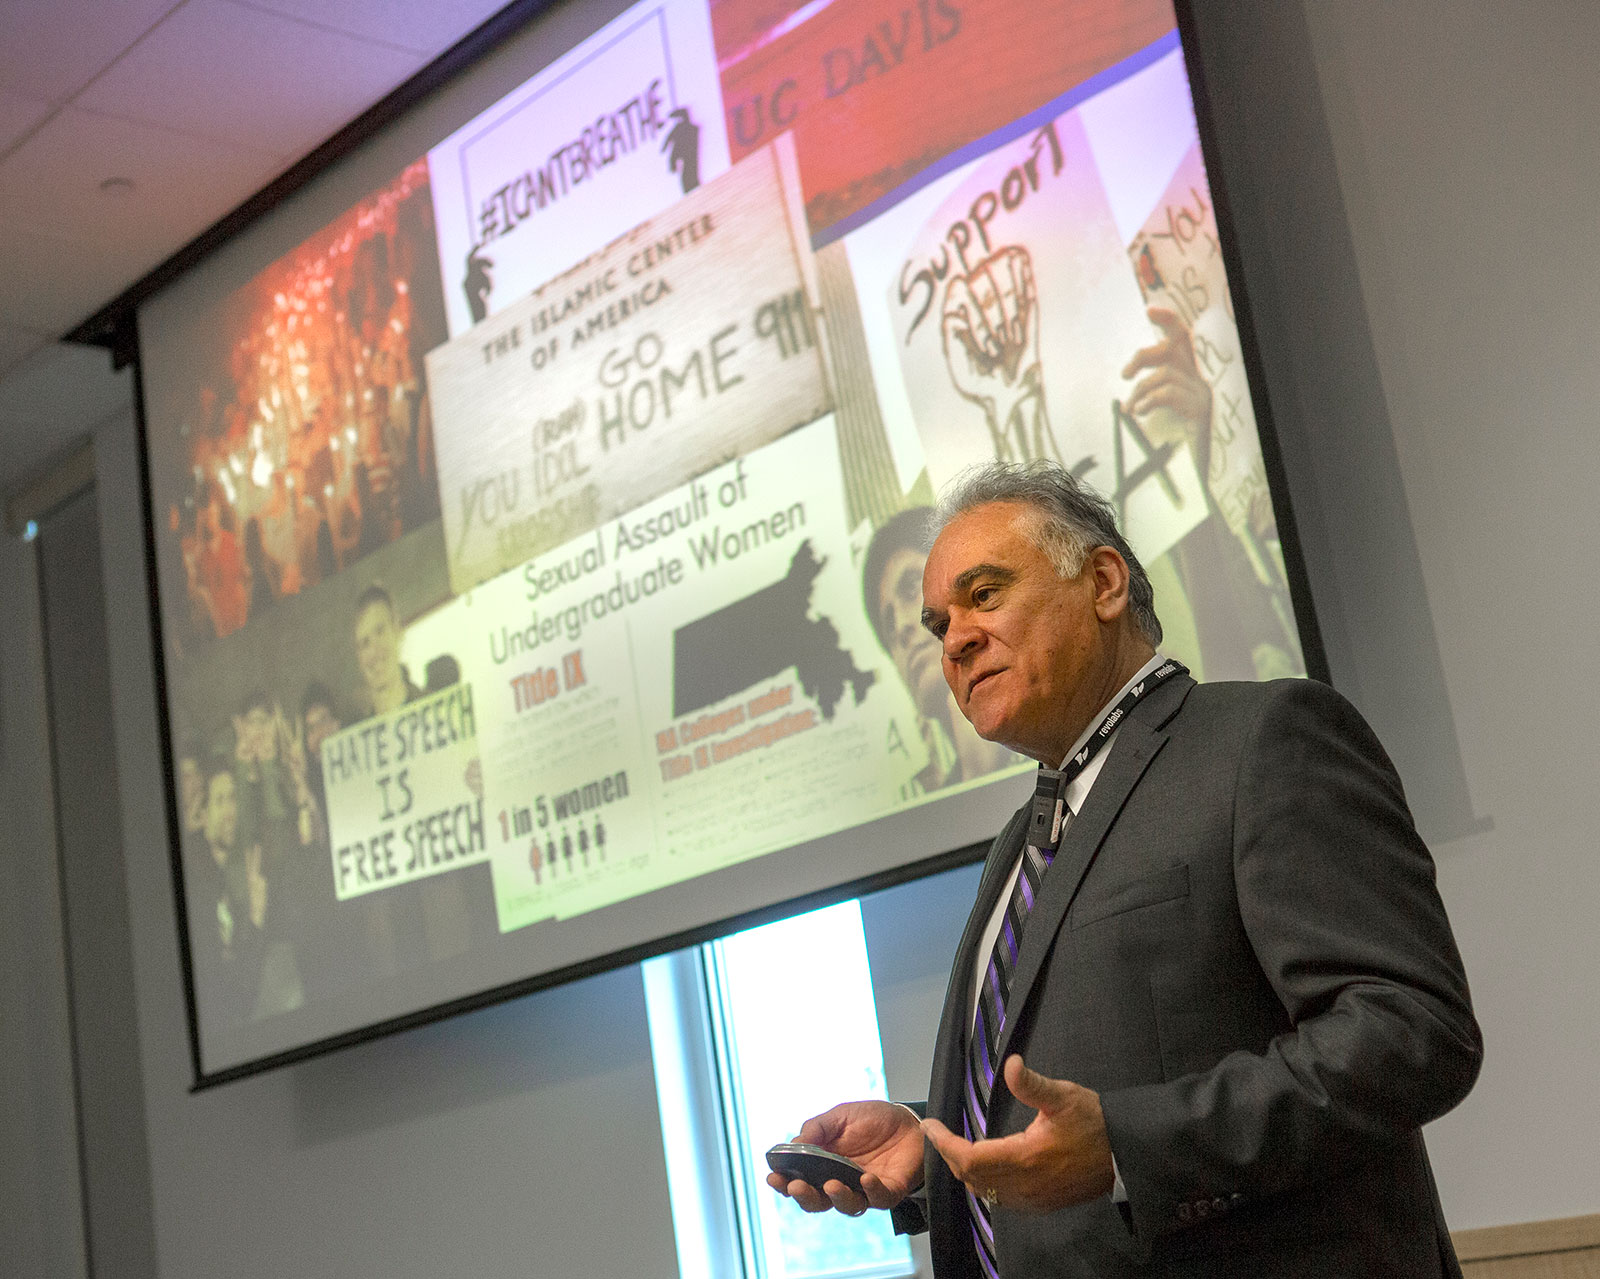 David Acosta, chief diversity officer with the AAMC, is pictured speaking at an event in August 2018 at Penn State College of Medicine in Hershey, PA. Acosta is seen in the foreground with a large presentation screen behind him depicting images related to bias.